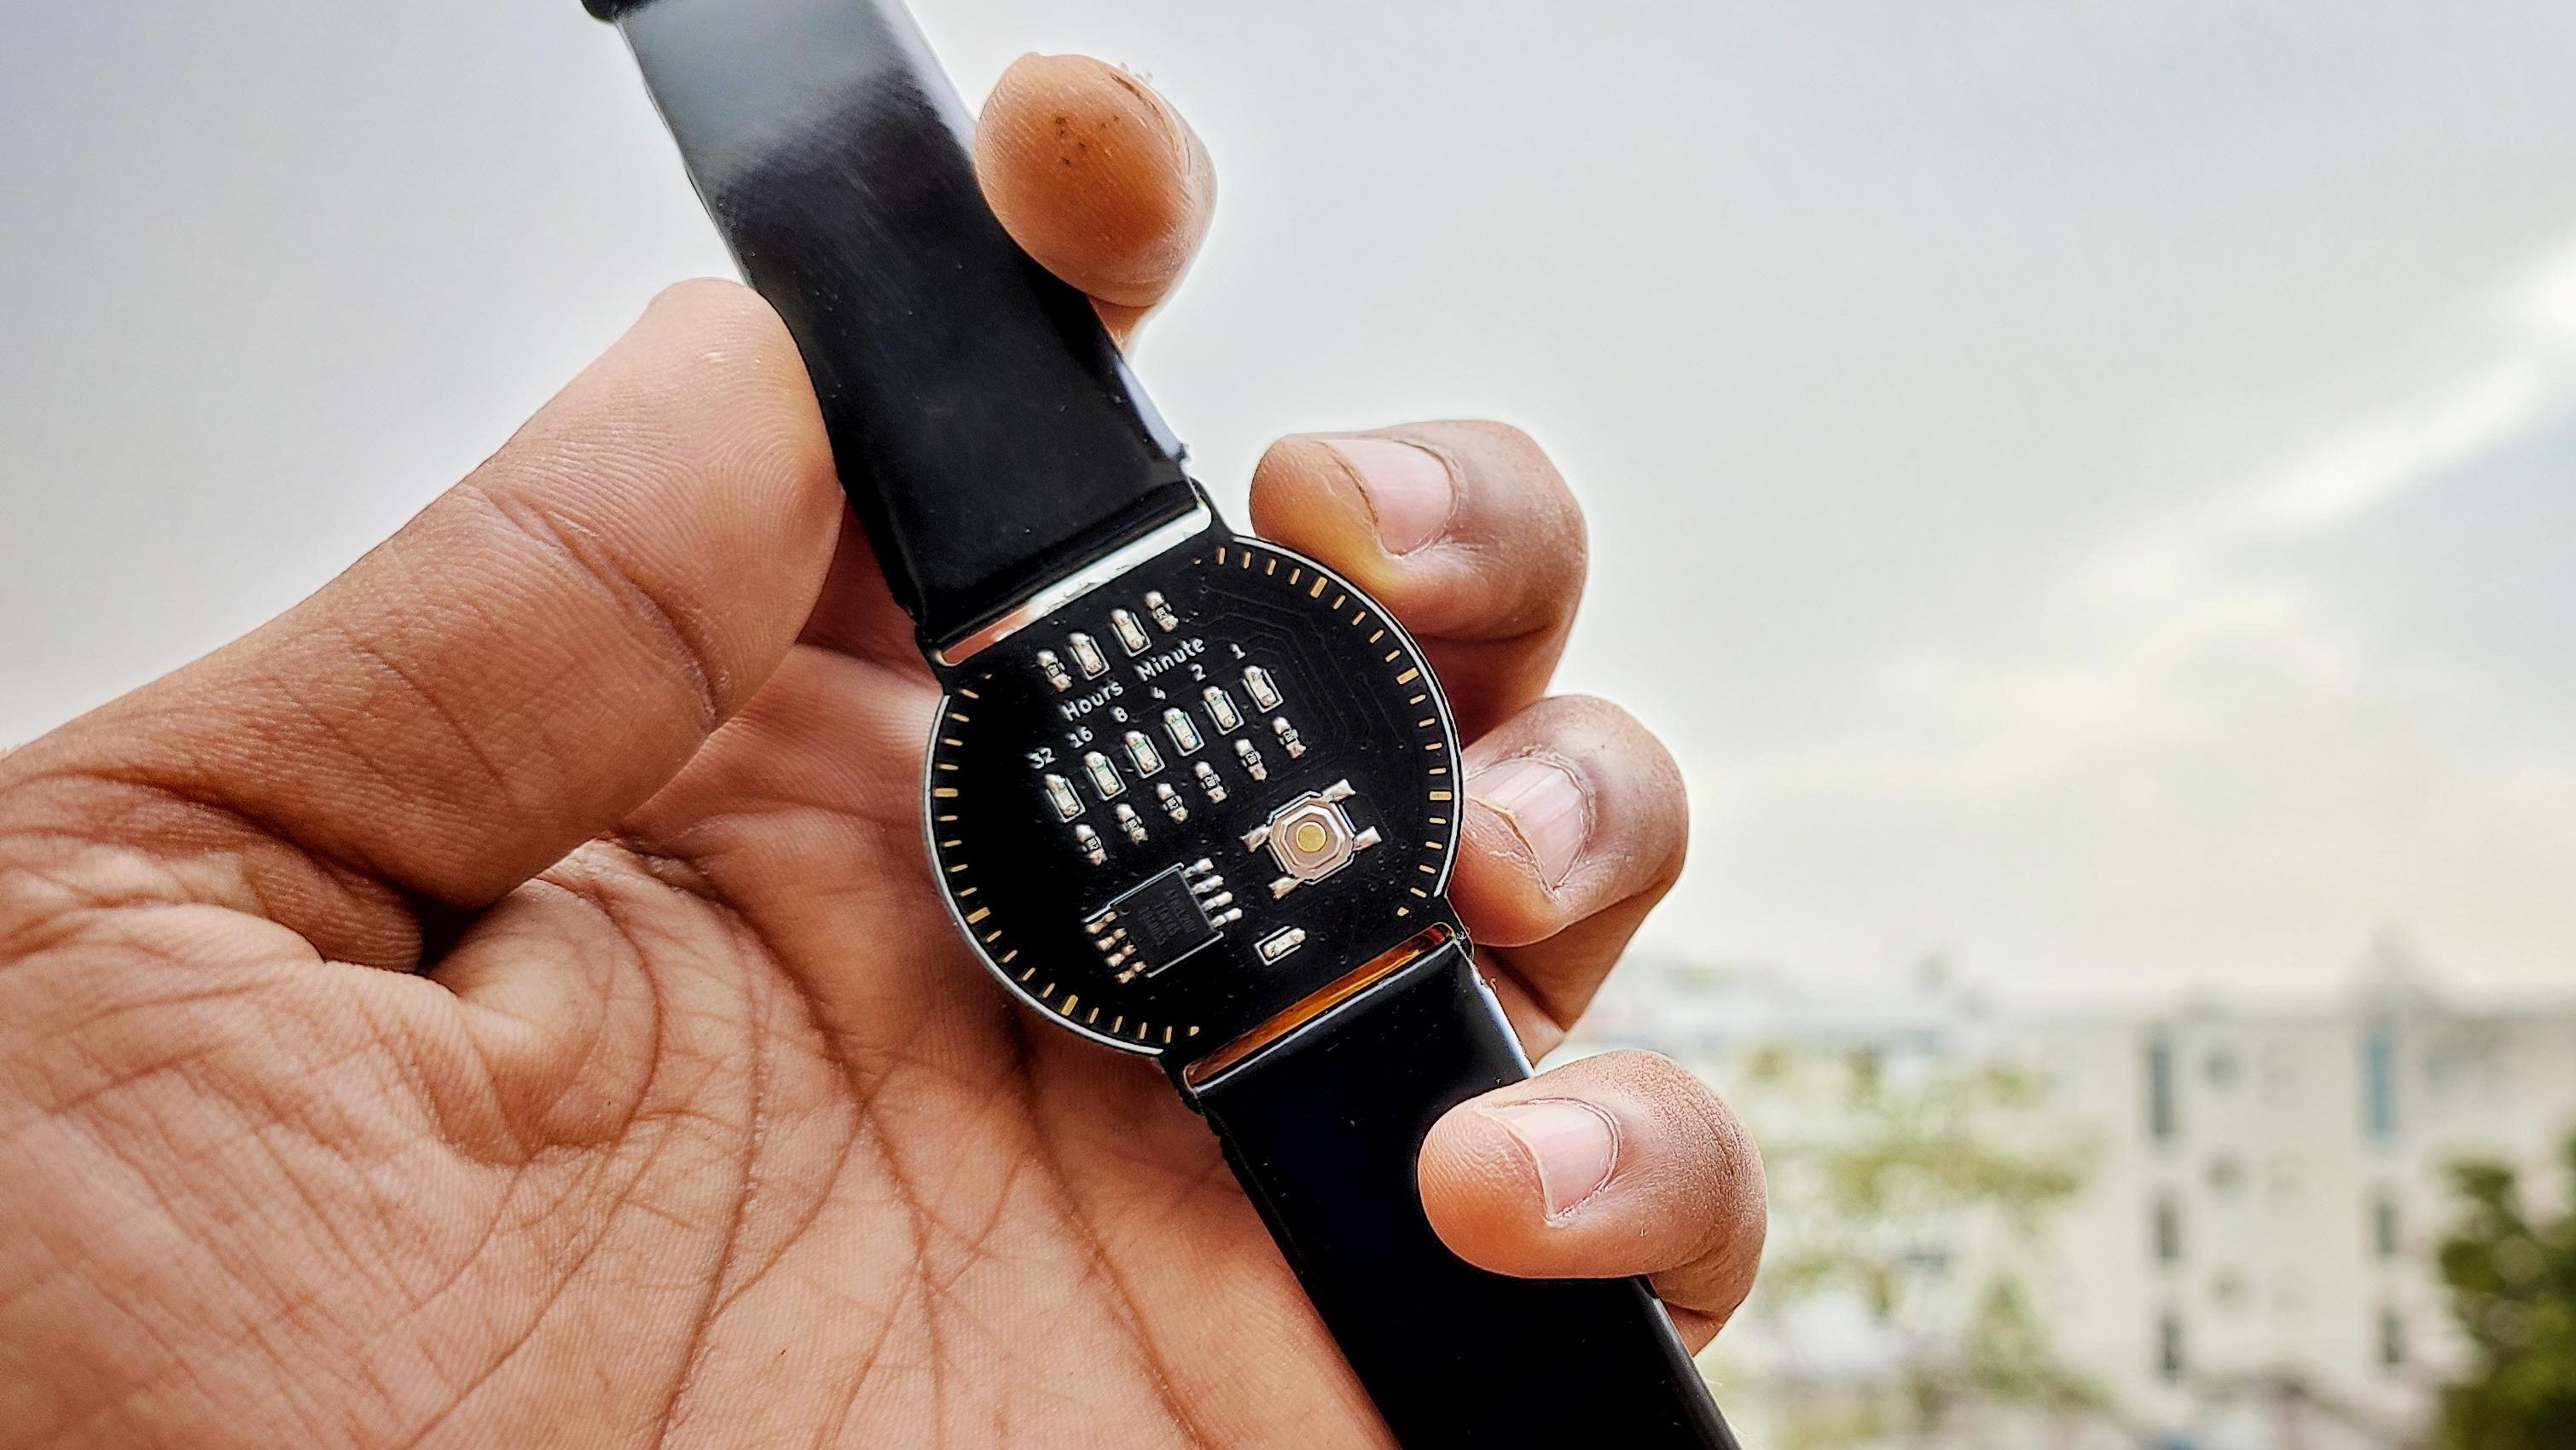 Binary PCB Watch For Designers Programmers from Synclight.ca on Tindie